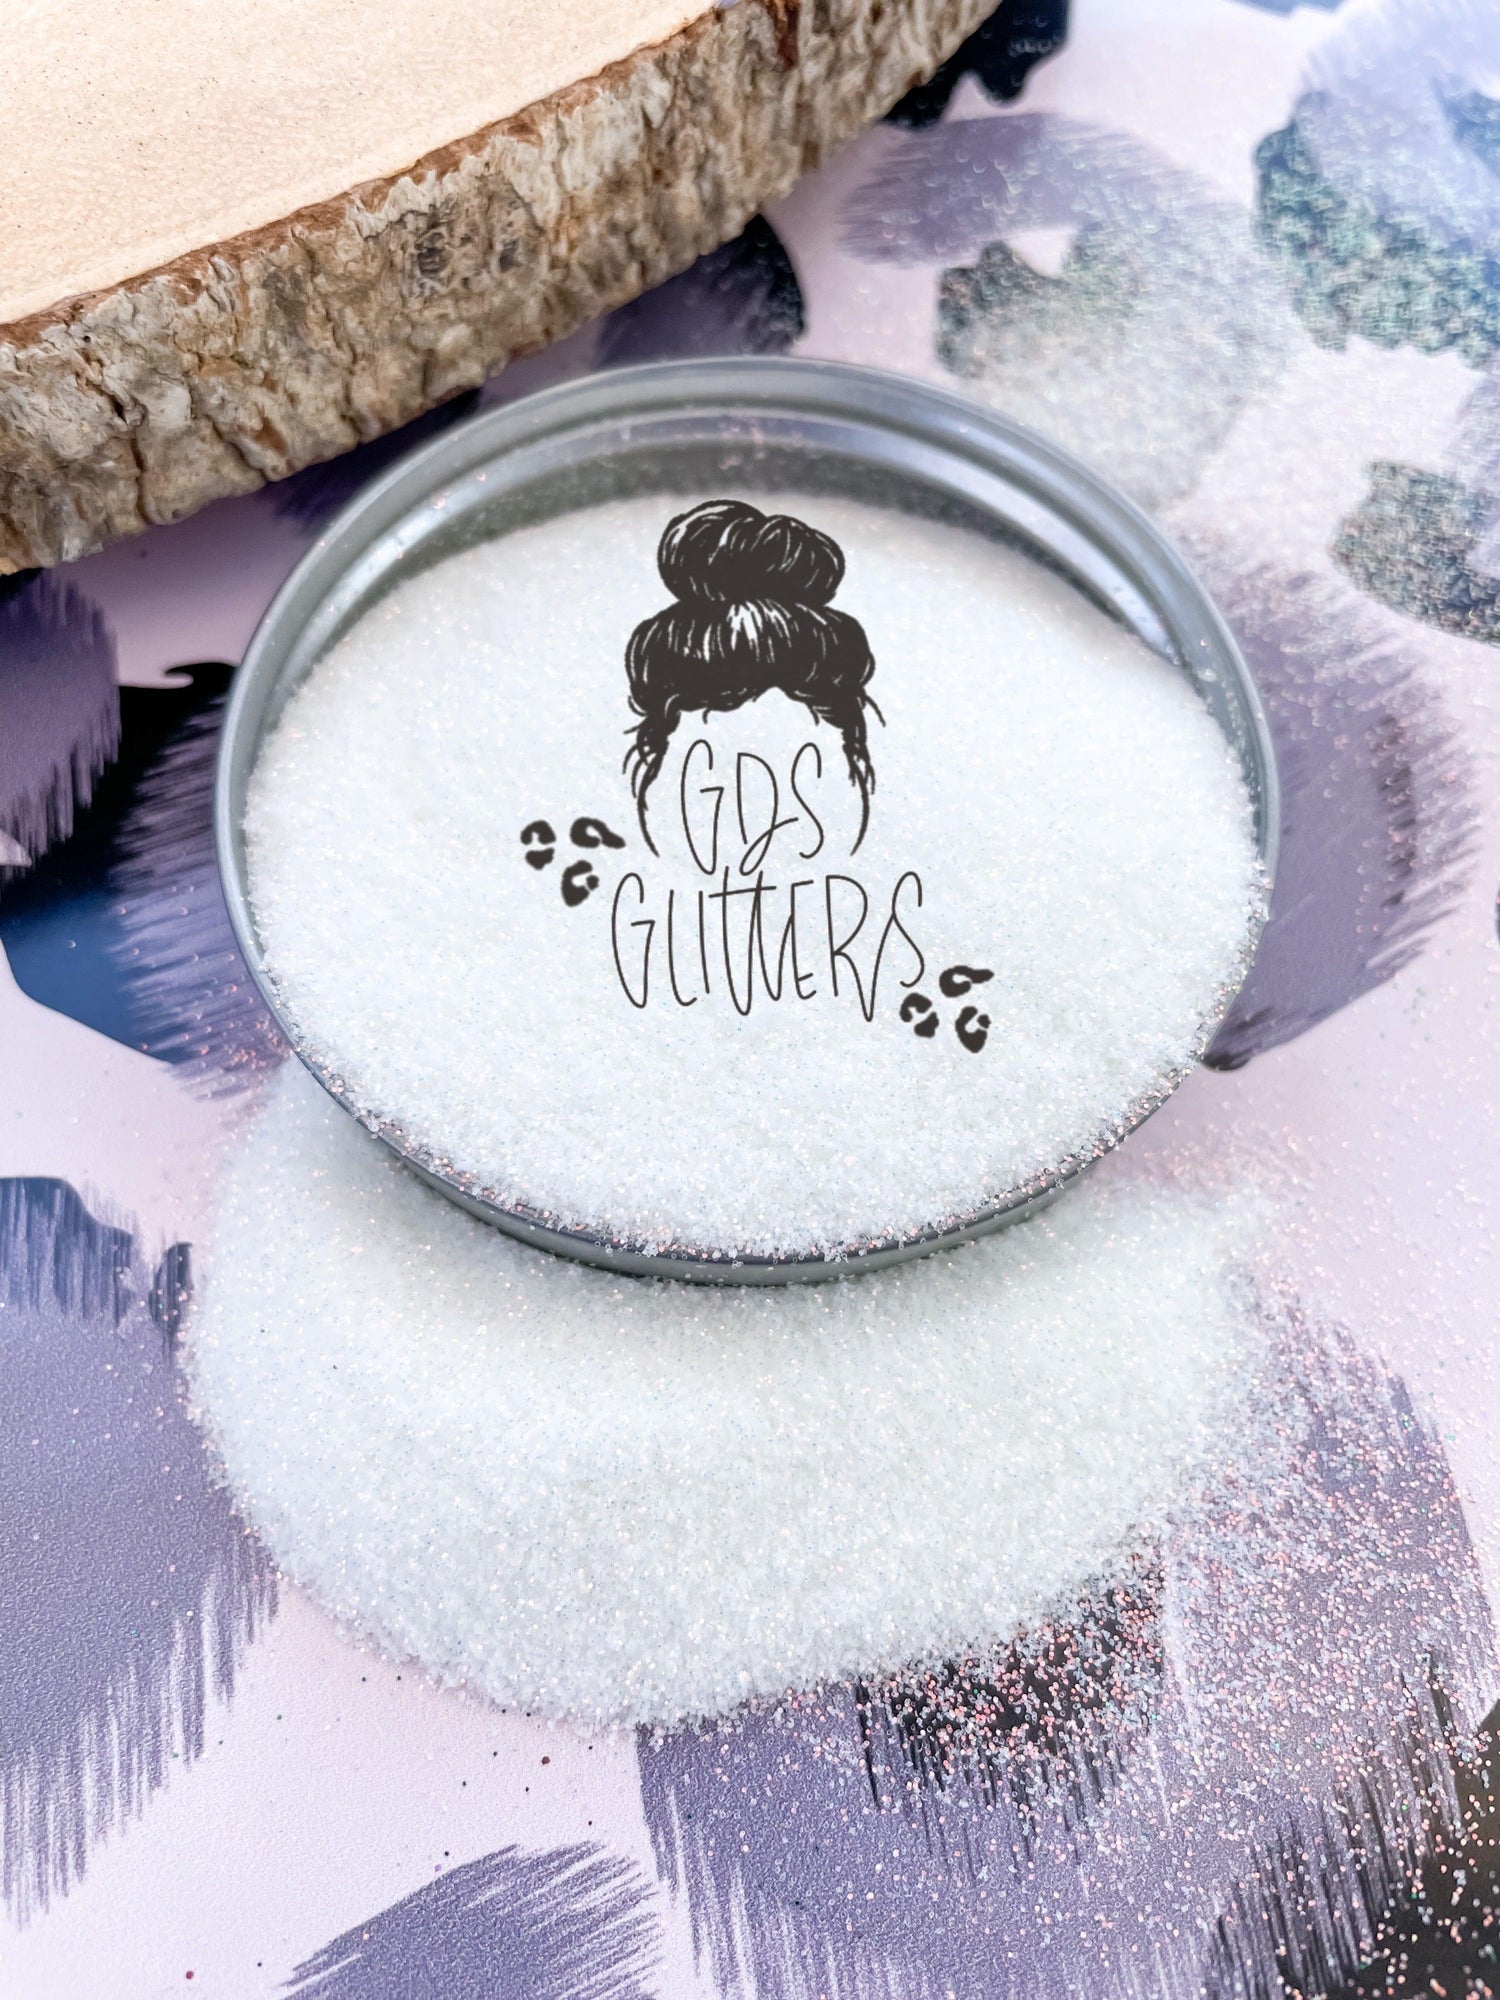 White iridescent extra fine glitter for crafts